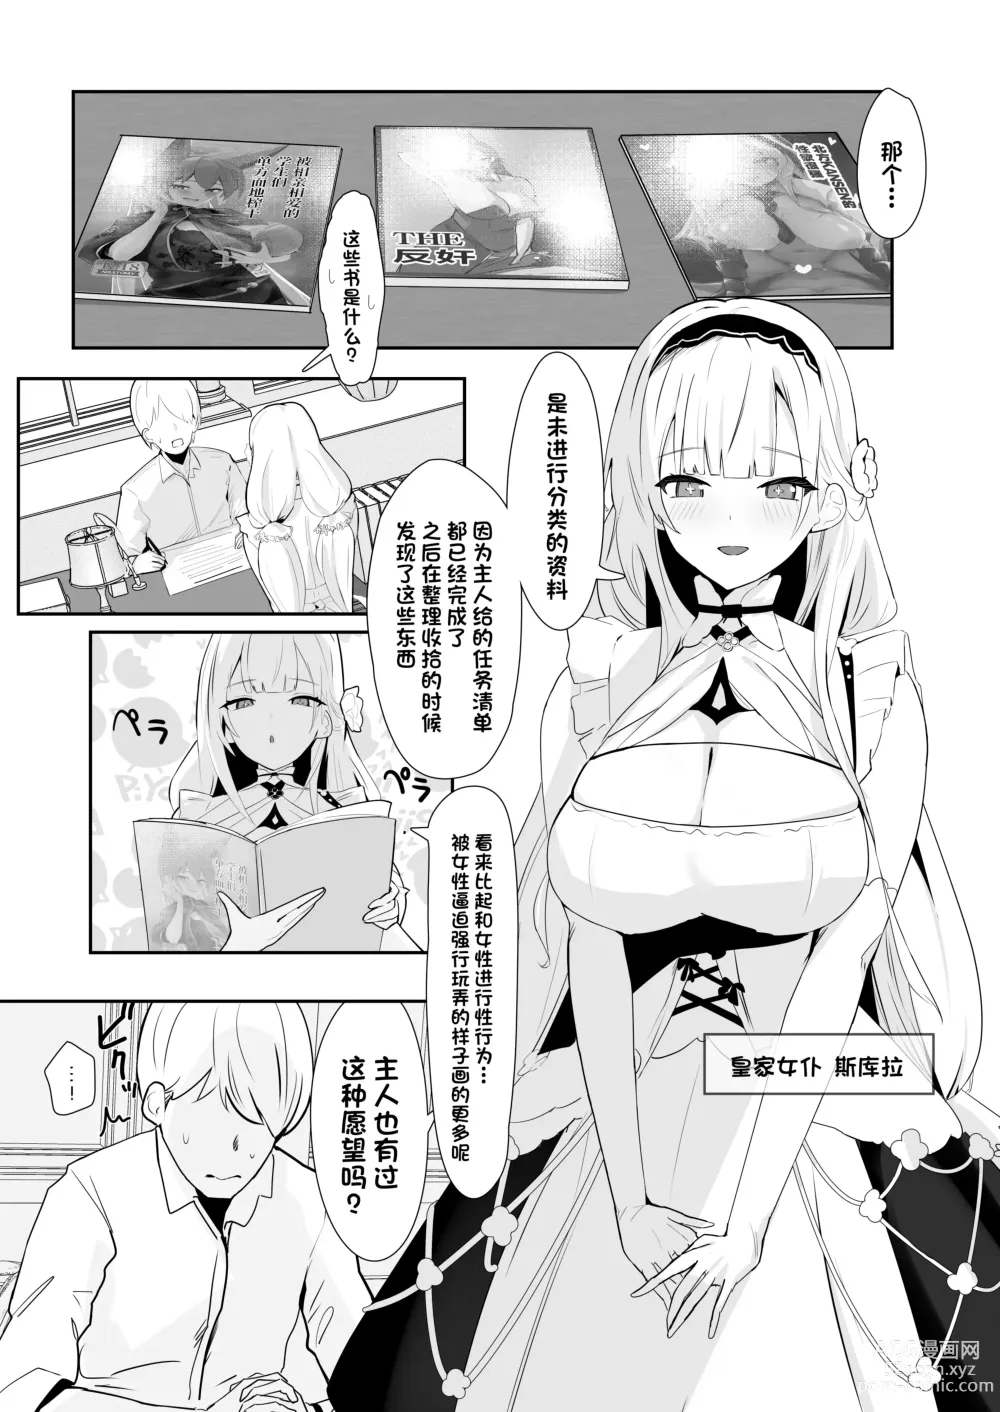 Page 3 of doujinshi 献给你的无上之宝